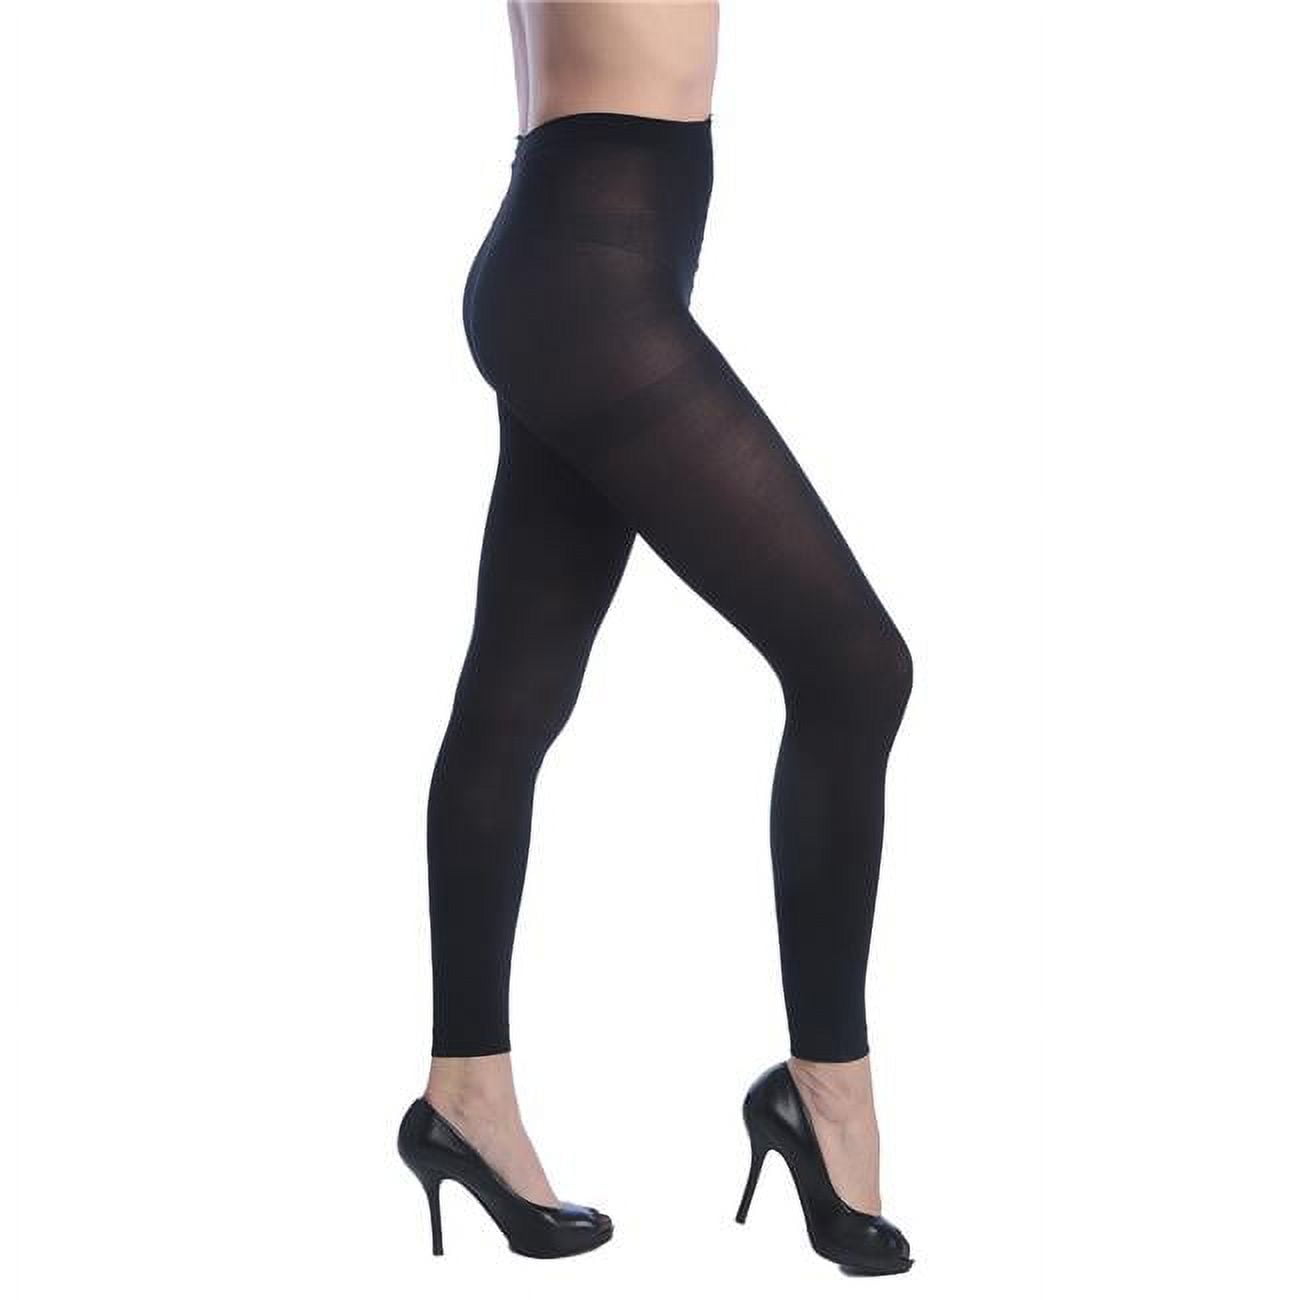 Women Opaque Control Top Footless Tights, Black - Queen Size - Case of 120  